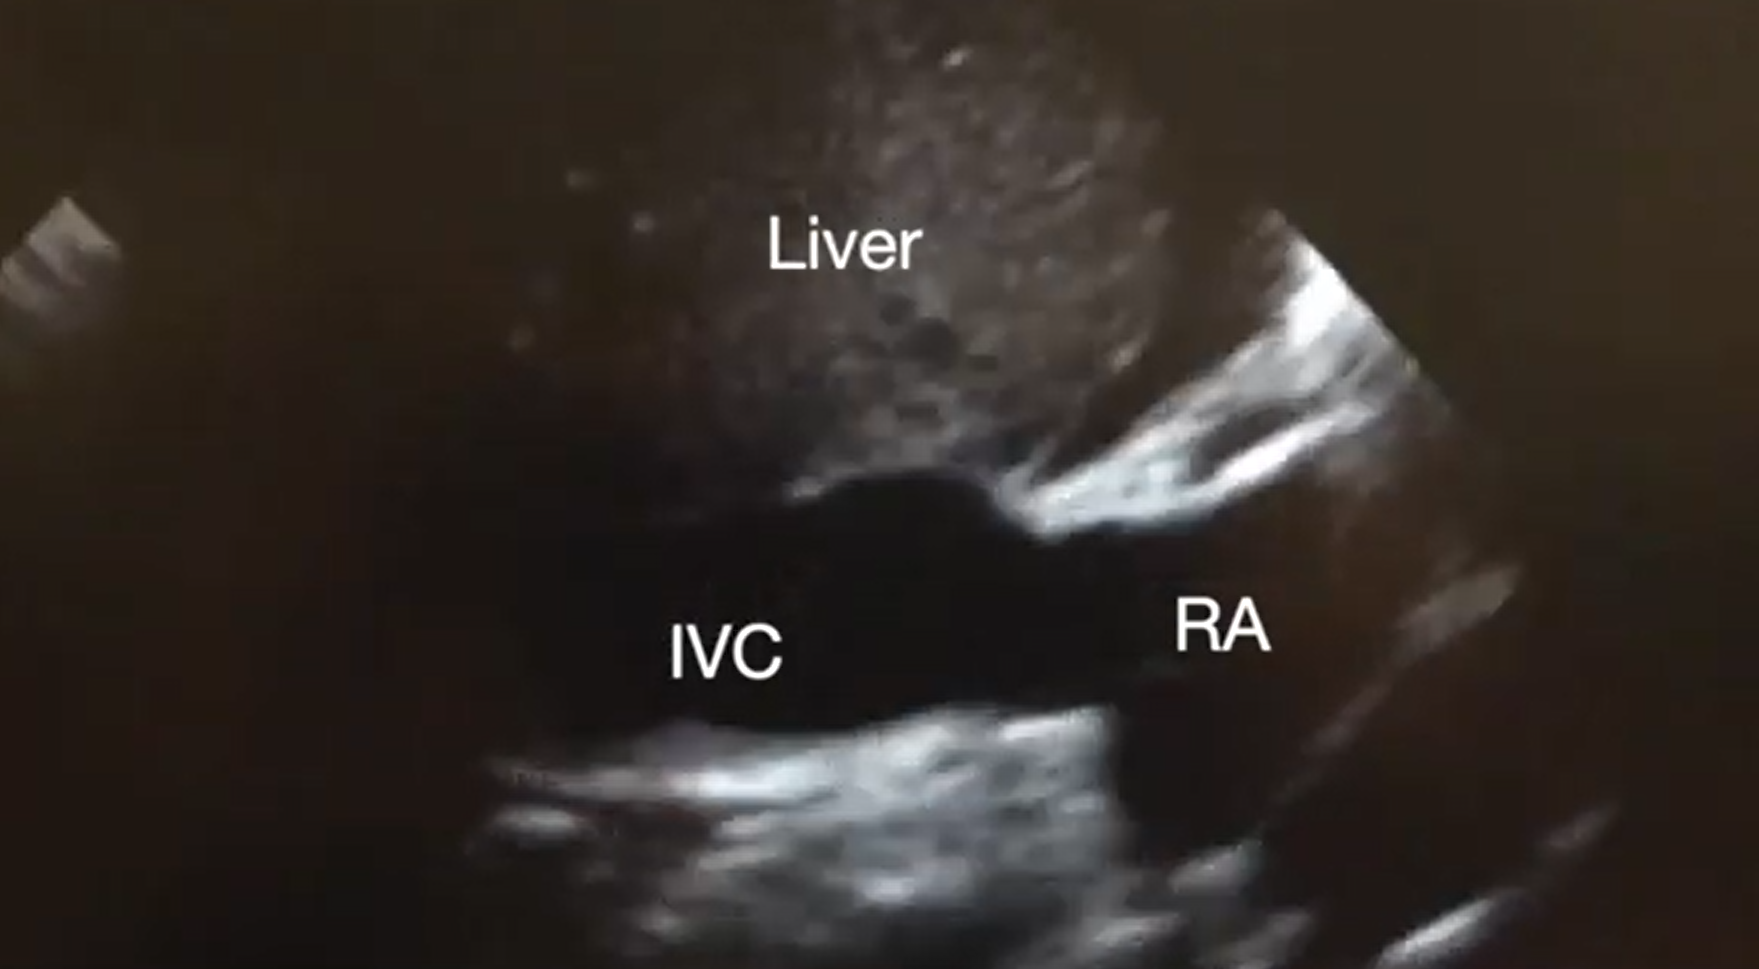 Supplemental Video 3, Subcostal IVC view demonstrating plethoric inferior vena cava (IVC) during chest compressions.